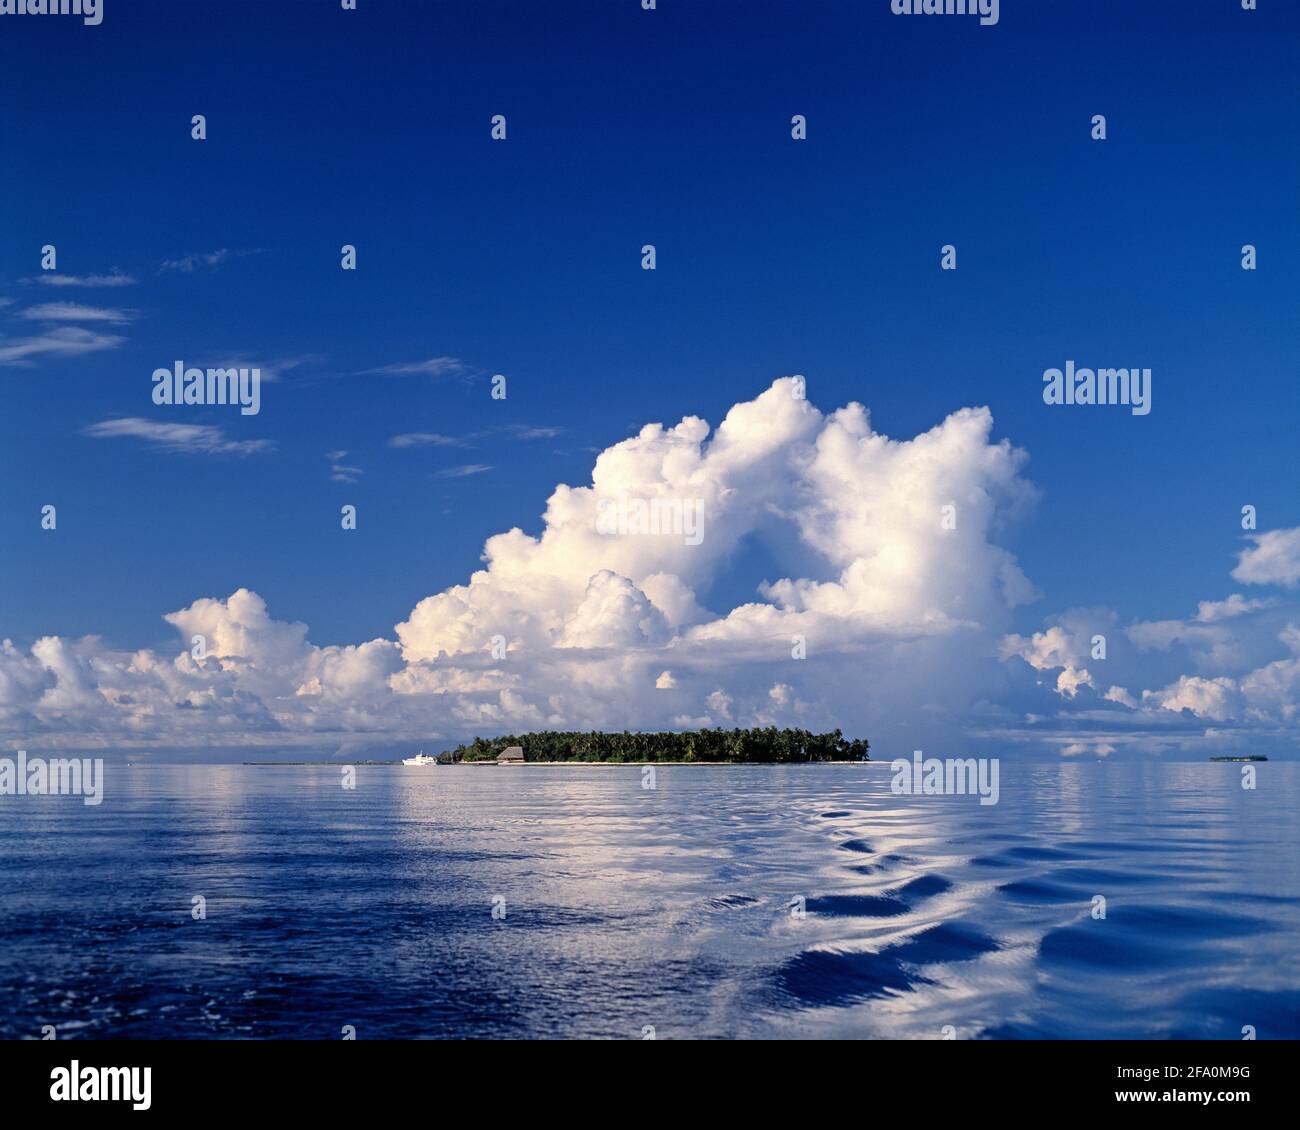 Maldives. Tropical island view from Indian Ocean. Stock Photo